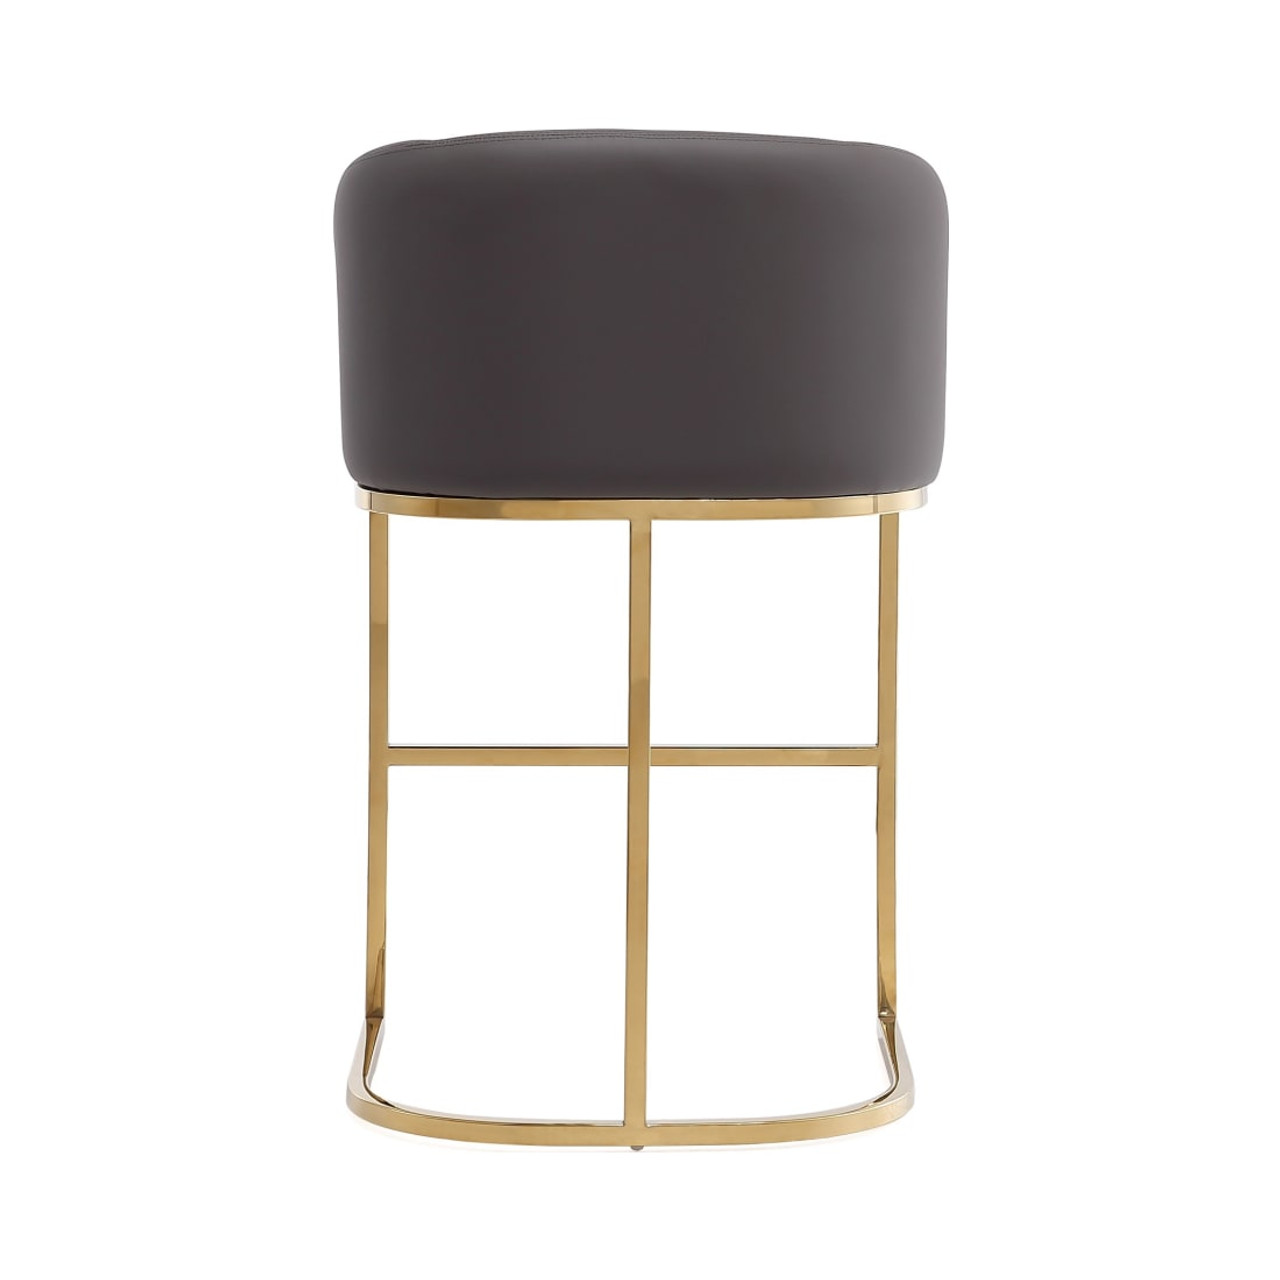 Louvre Counter Stool in Grey and Titanium Gold